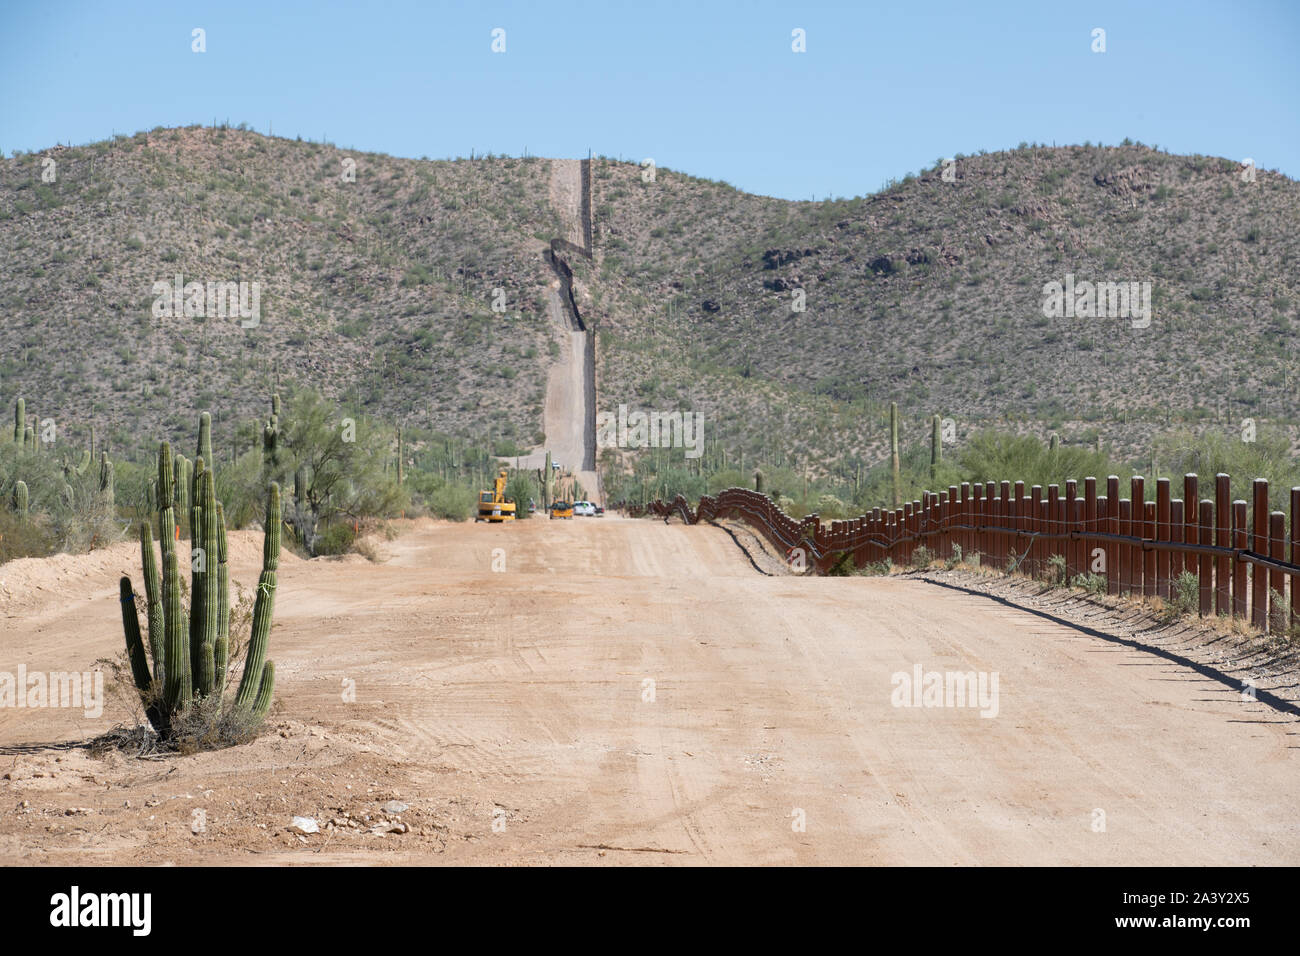 The original bollard border wall following an access road through Organ Pipe National Monument October 8, 2019 west of Lukeville, Arizona. Over 100 endangered cacti, including 76 saguaros, have been relocated to make room for the new border wall project along the U.S. - Mexico border. Stock Photo